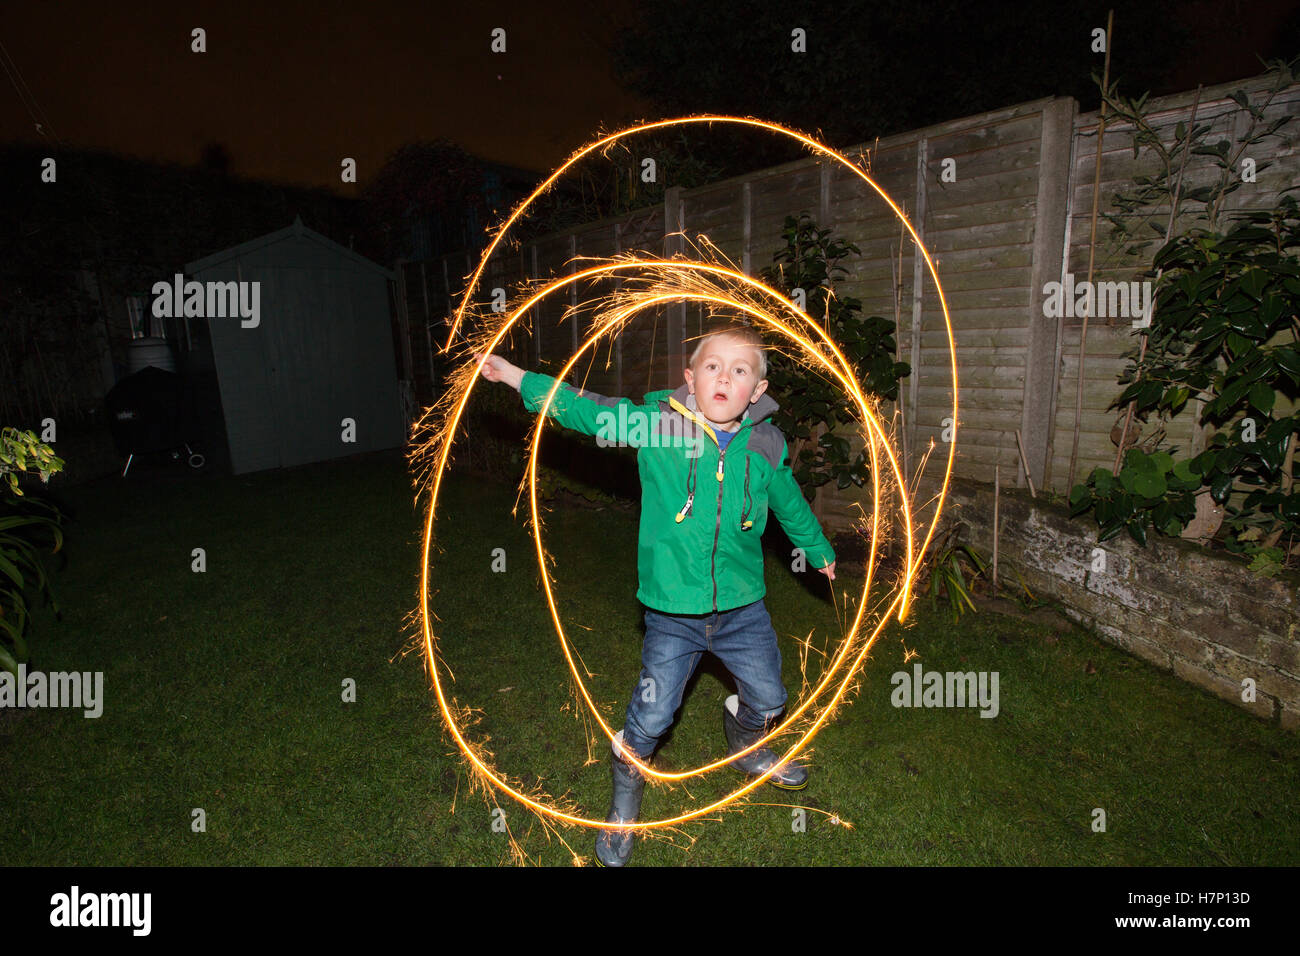 Boy (aged 5) in suburban backgarden with hand-held firework type 'sparkler' on Bonfire night or traditionally Guy Fawkes night. Stock Photo